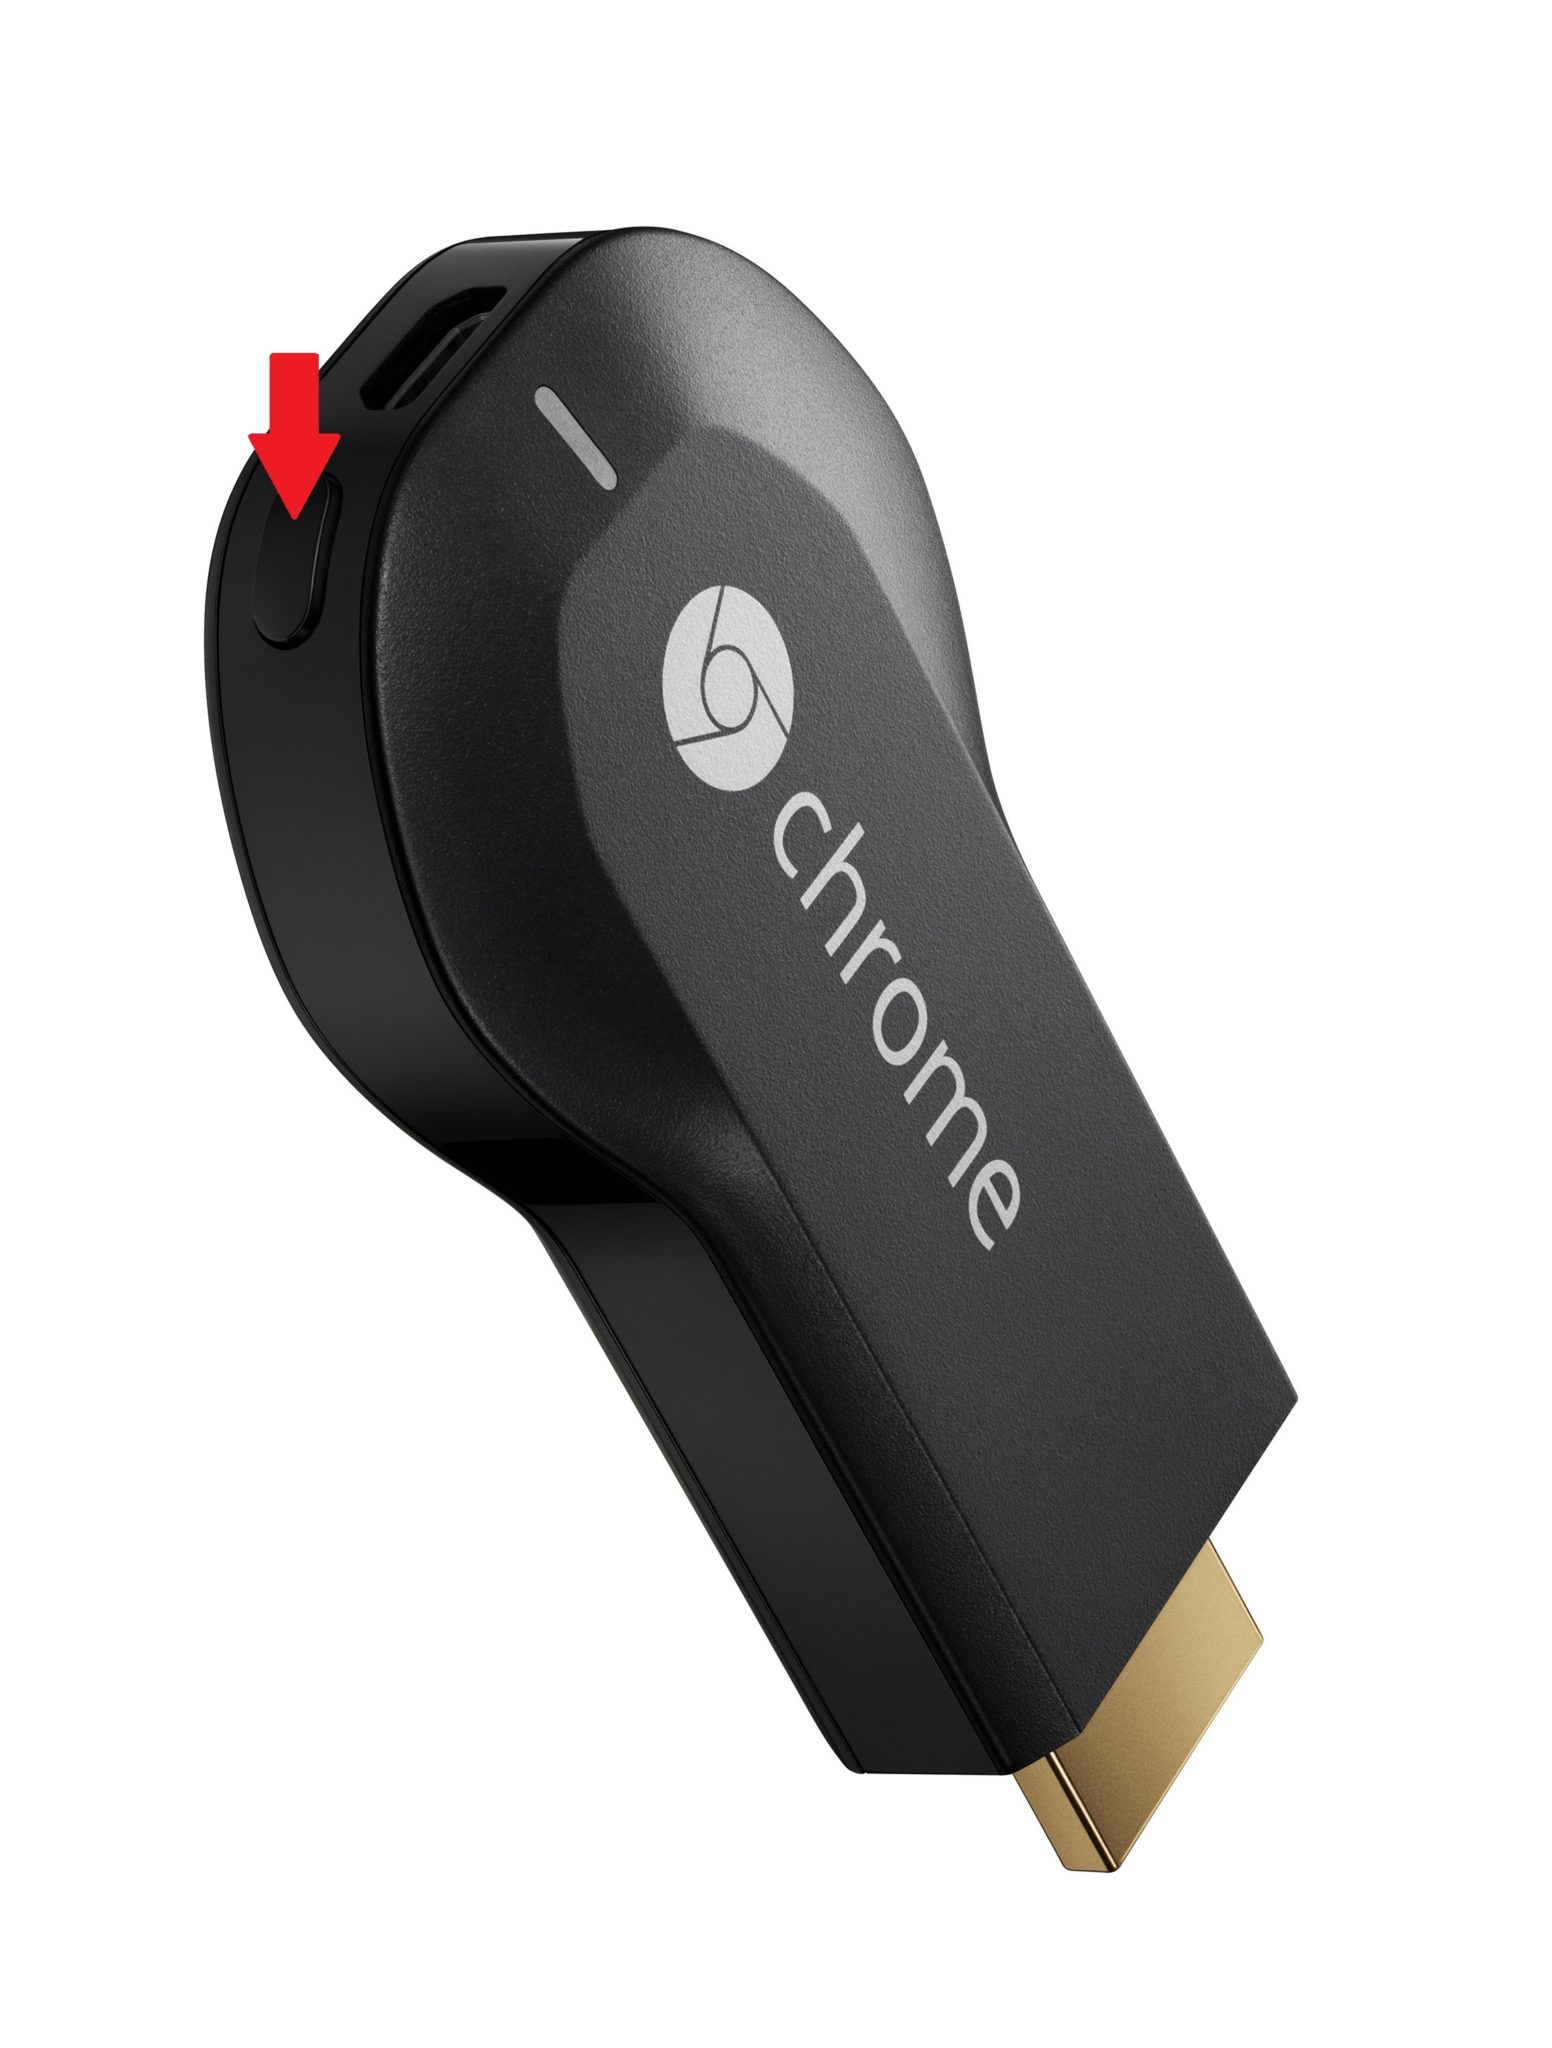 chromecast tv source not supported